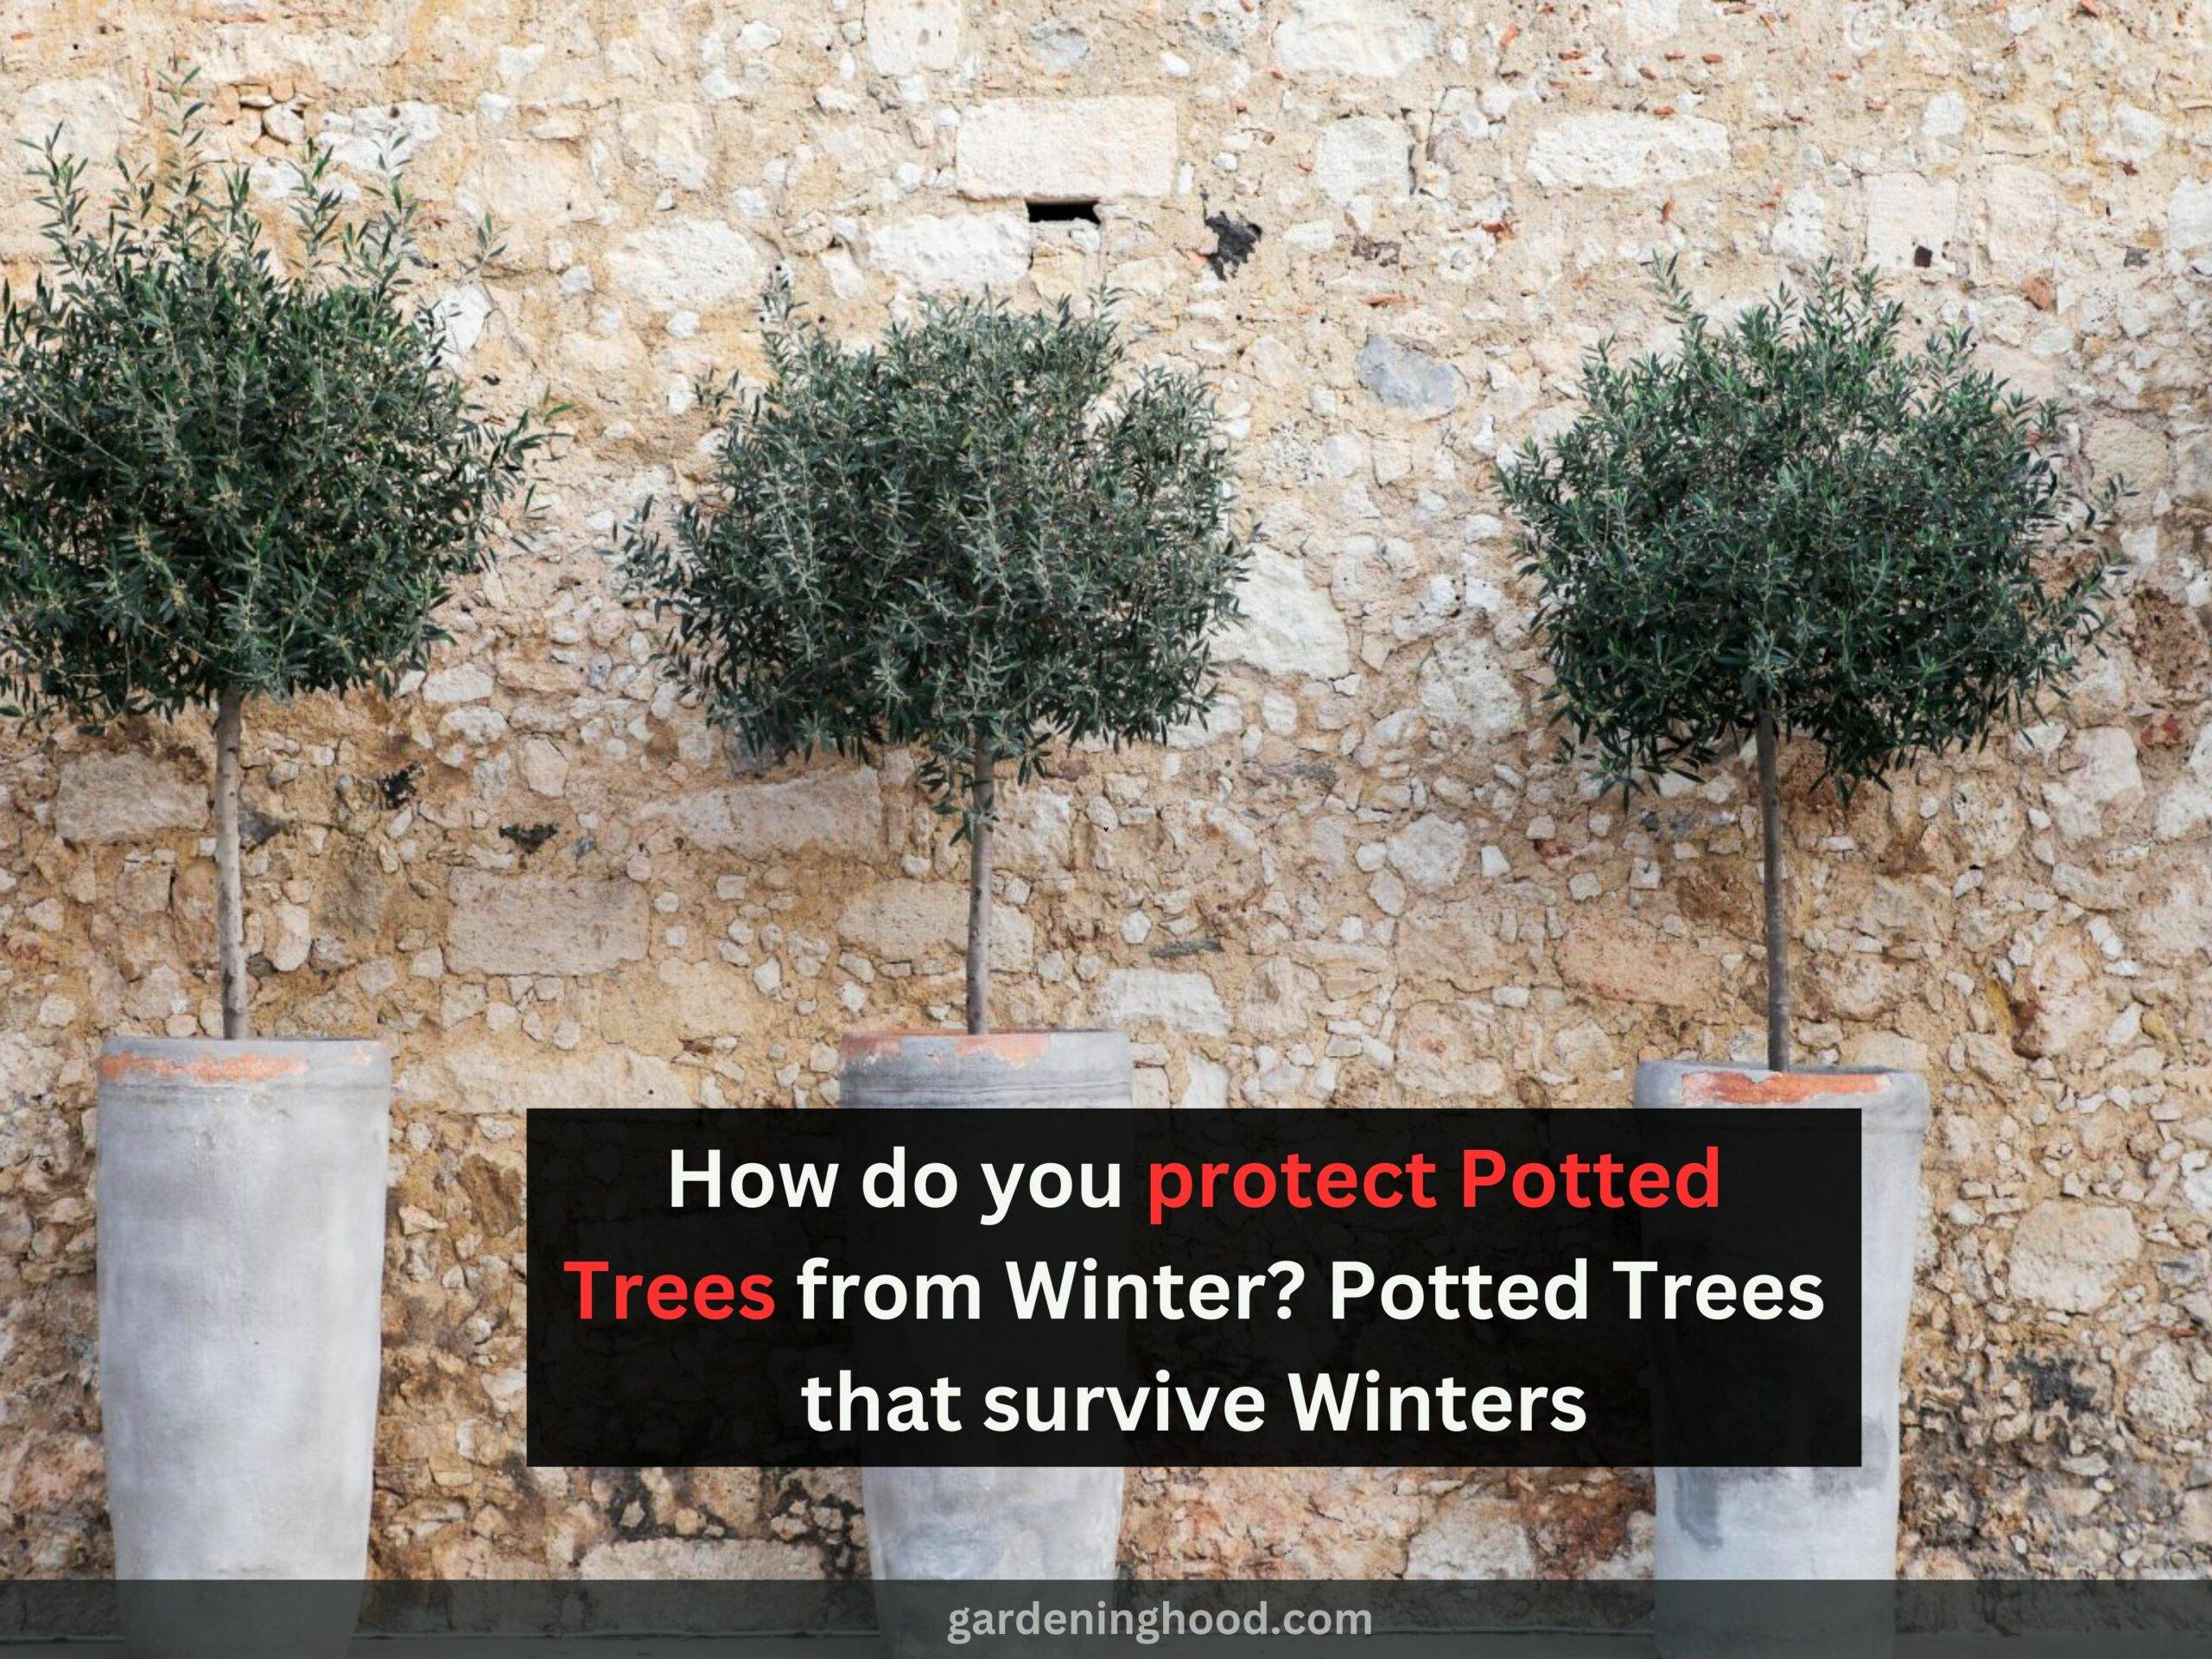 How do you protect Potted Trees from Winter? - Potted Trees that survive Winters